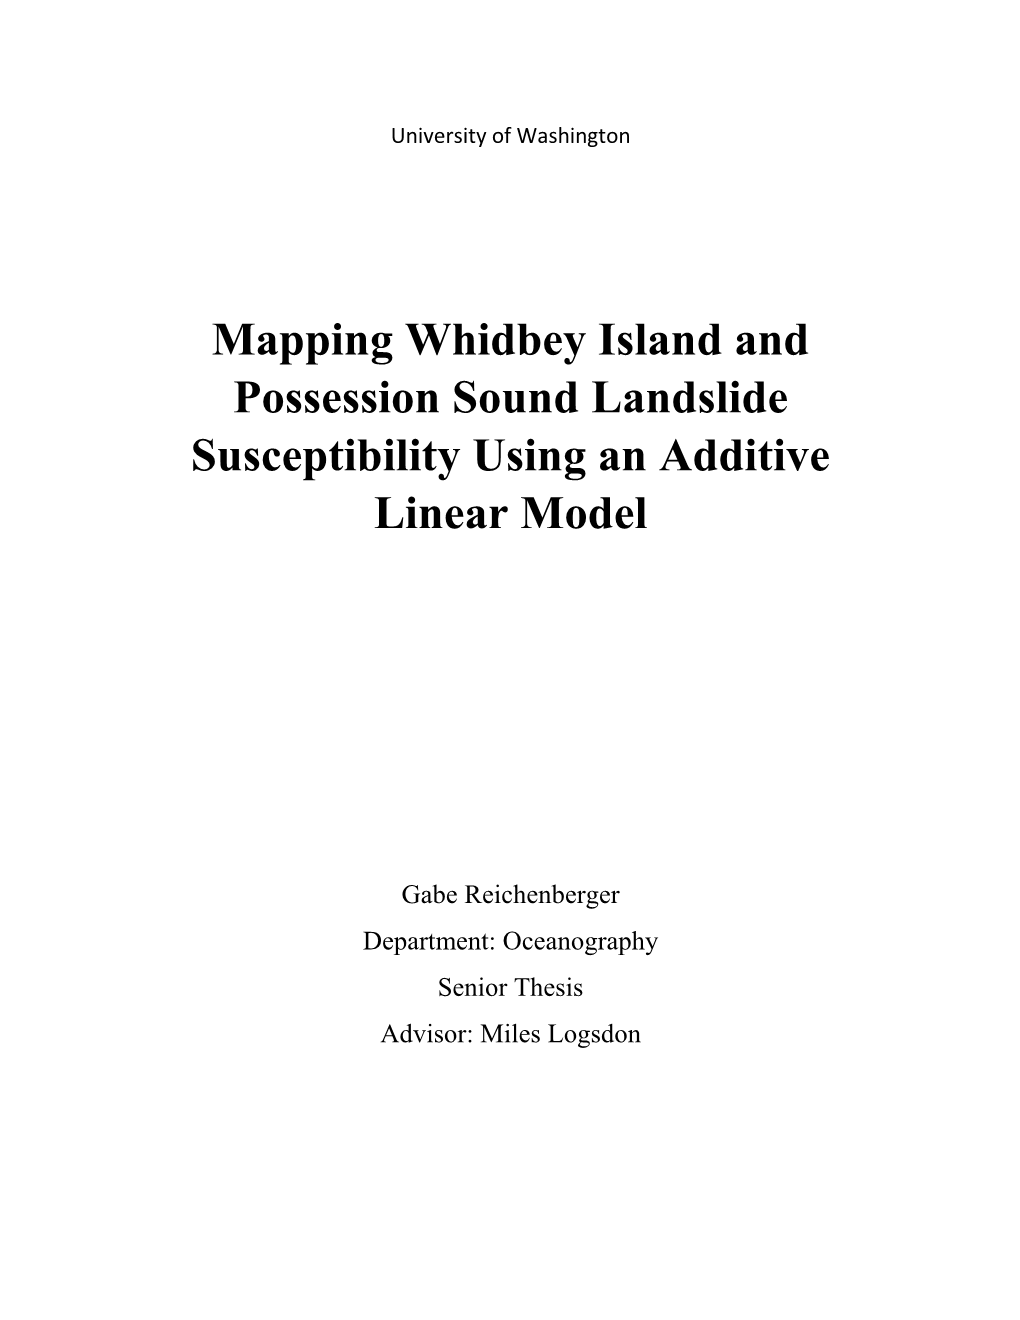 Mapping Whidbey Island and Possession Sound Landslide Susceptibility Using an Additive Linear Model